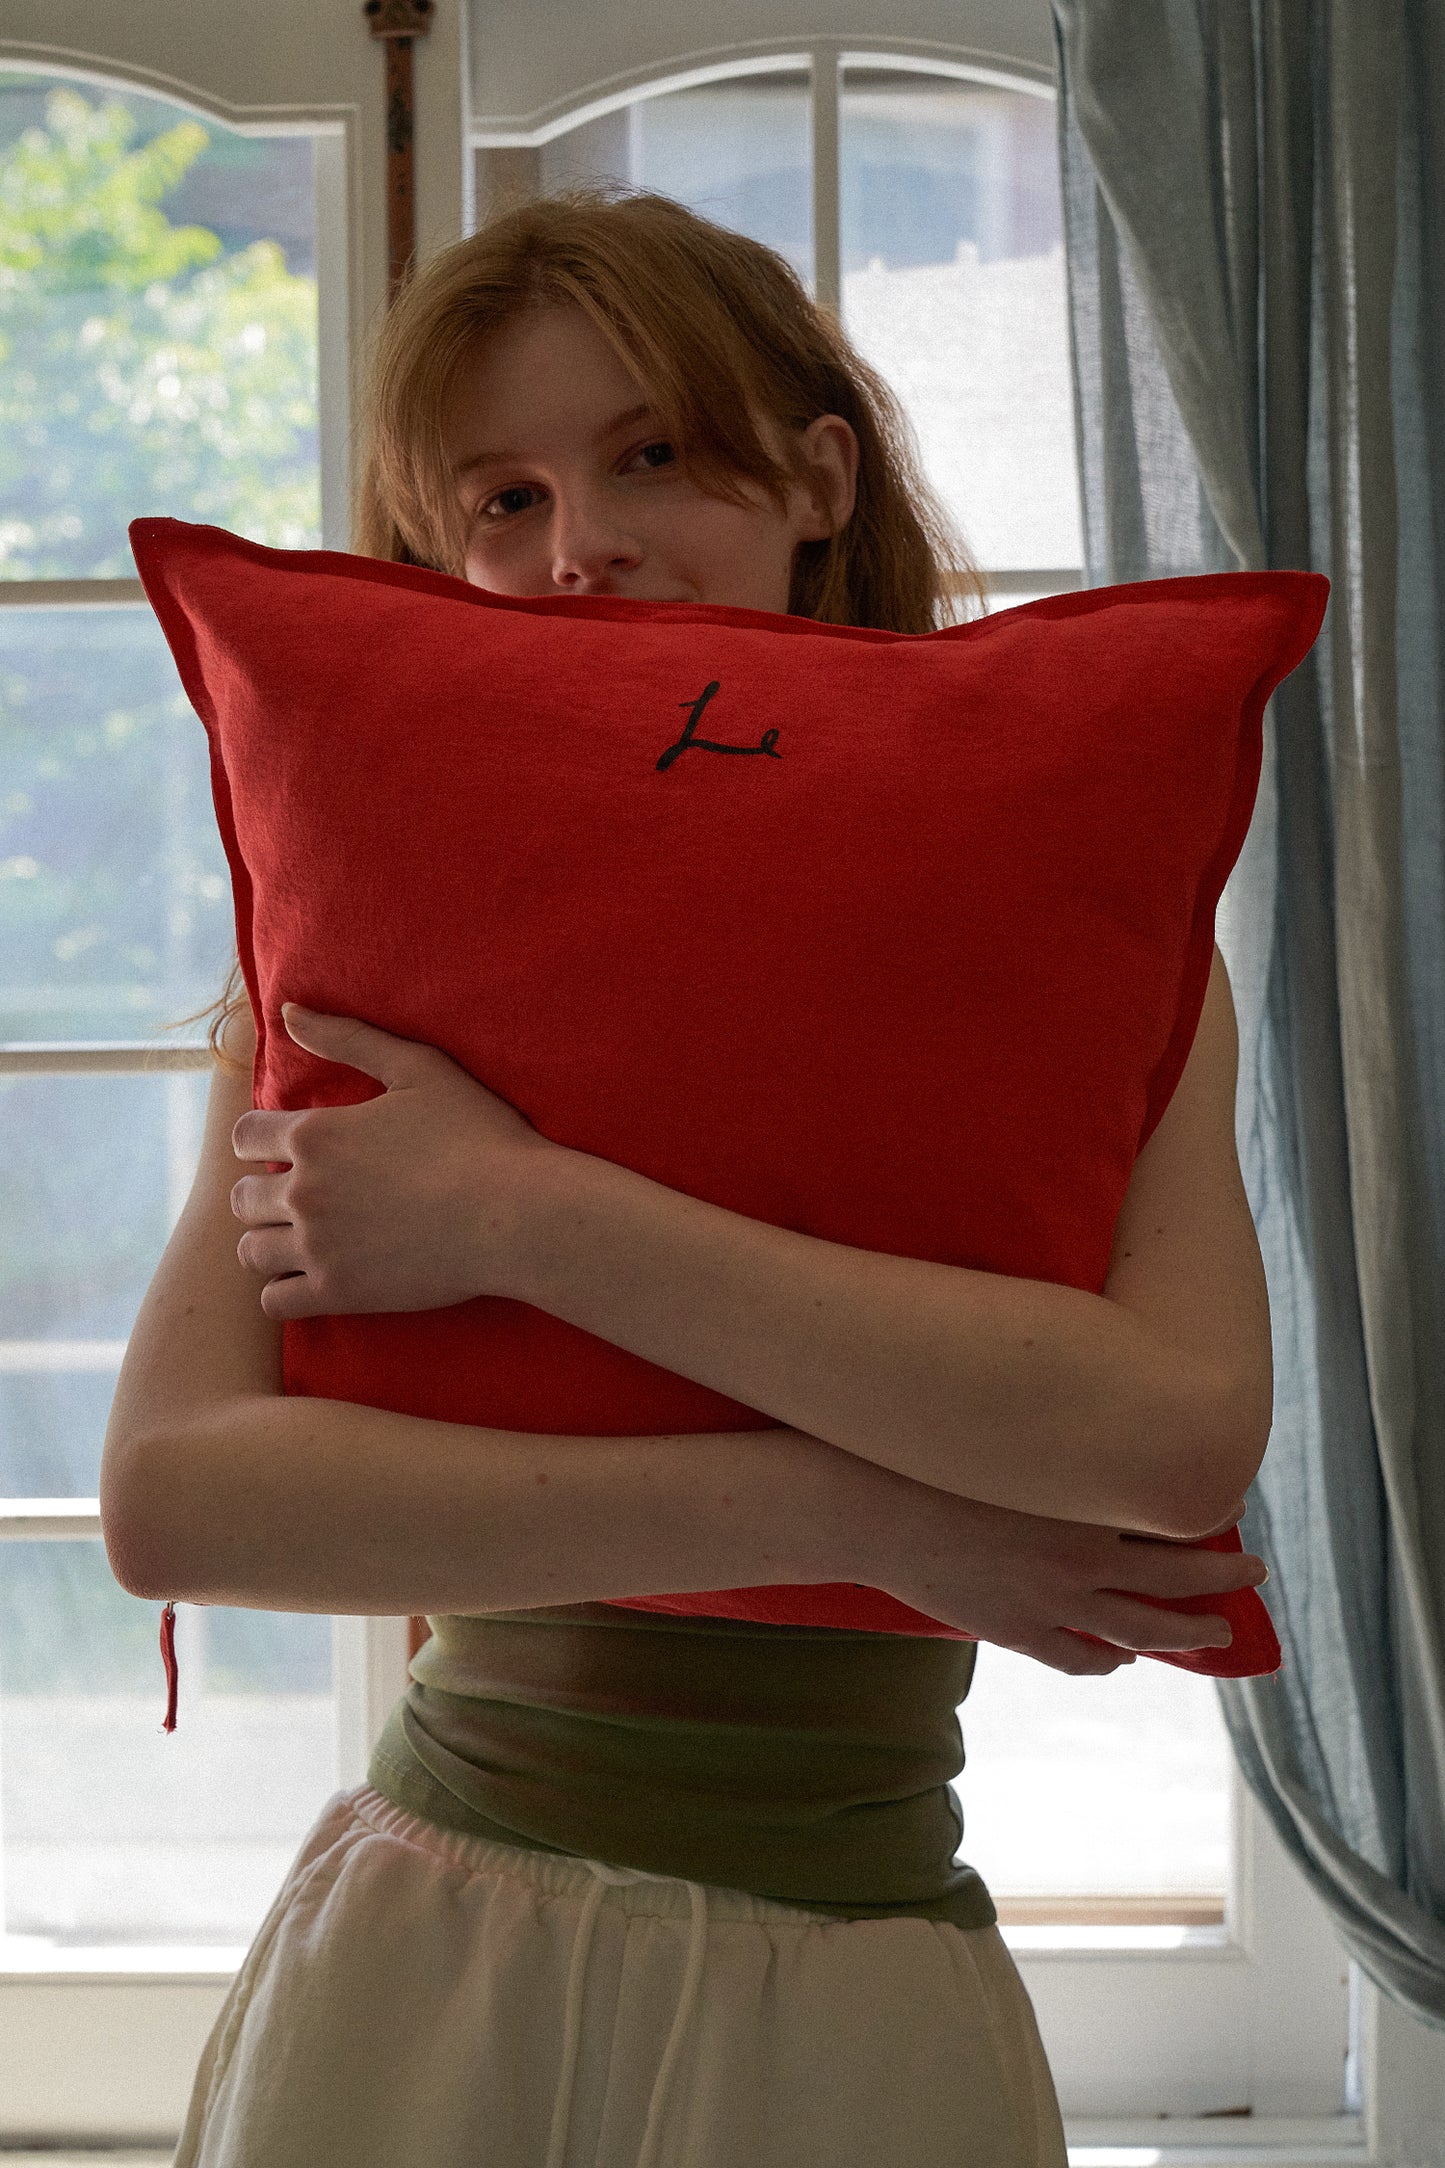 Hotel 827 Breezy Day Cushion Cover (Chilli)